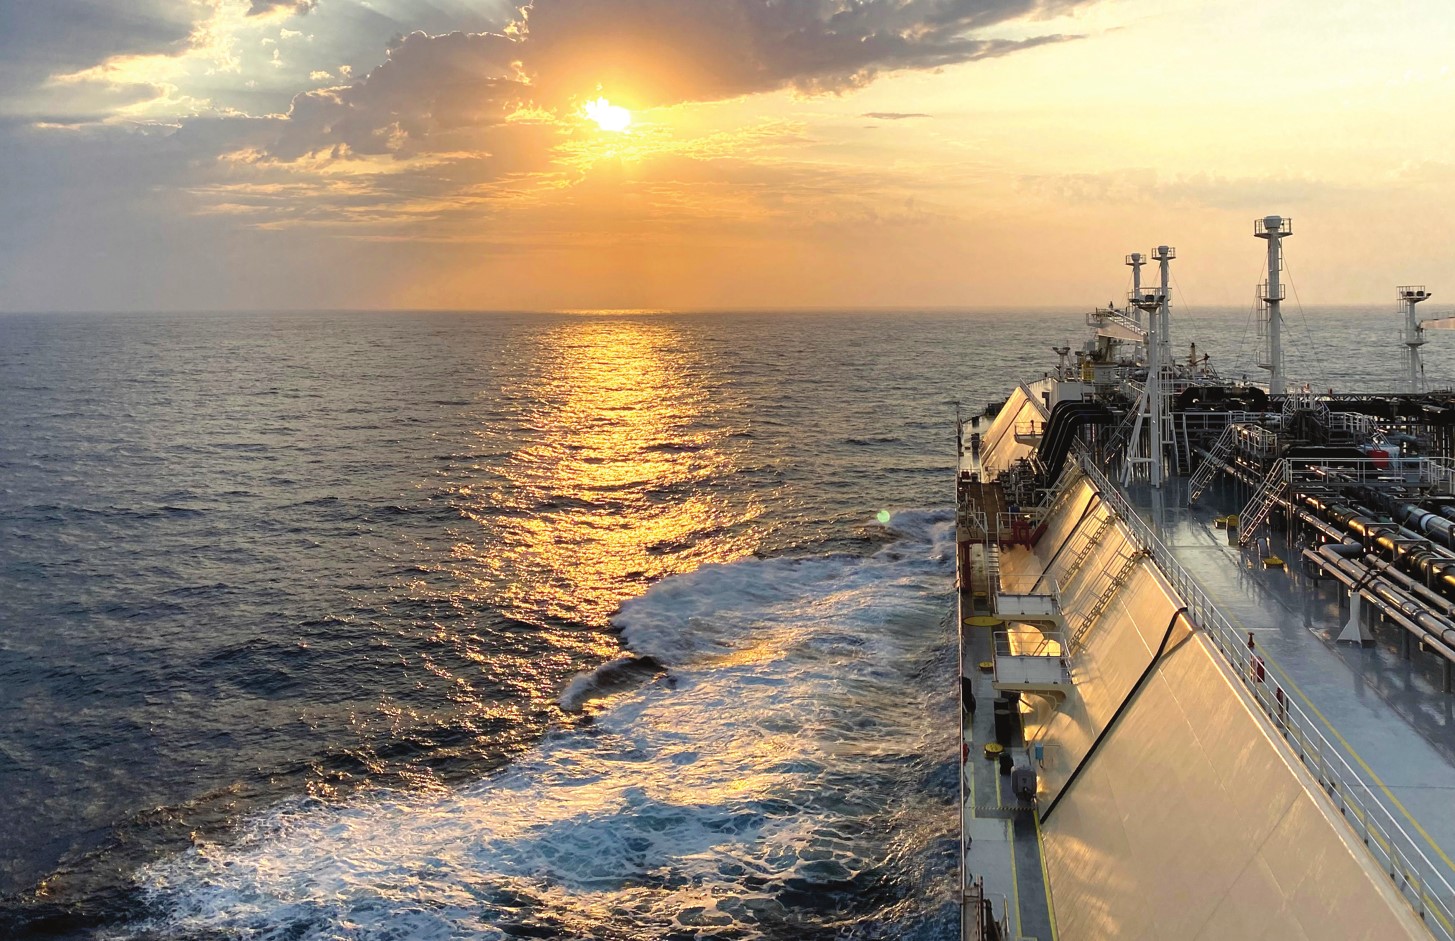 CoolCo, GAIL seal charter deal for newbuild LNG carrier